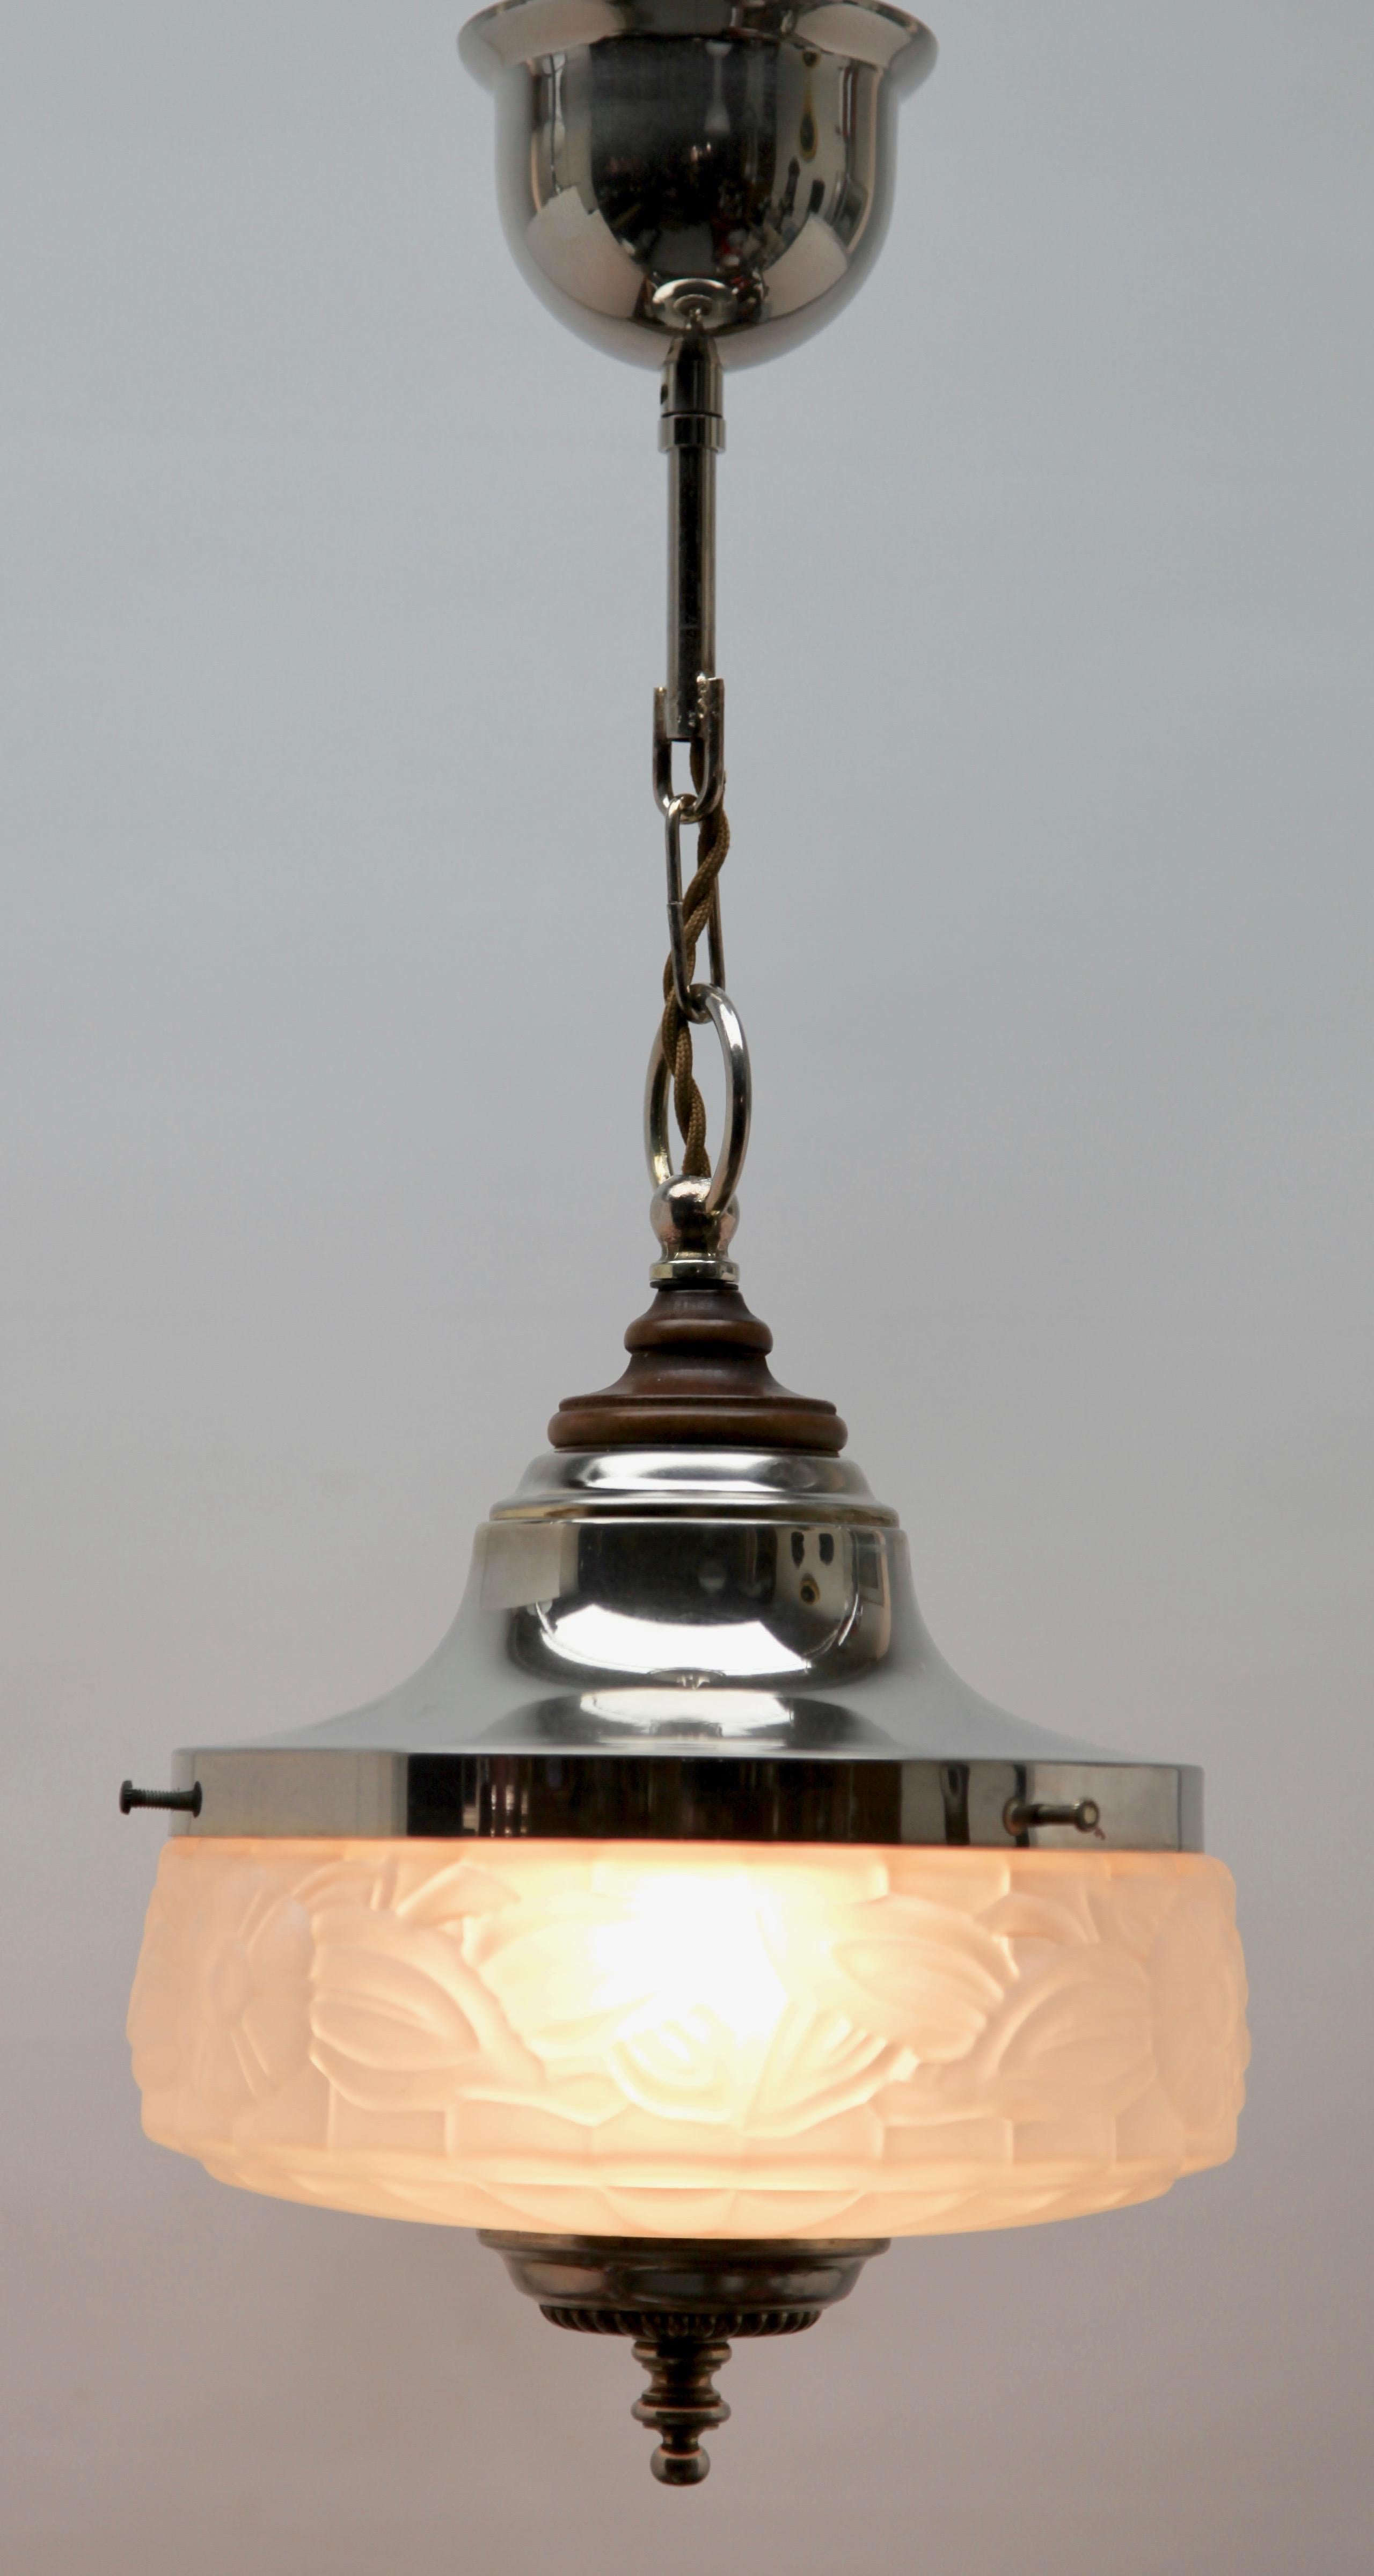 Art Deco ceiling lamp
Photography fails to capture the simple elegant illumination provided by this lamp.

Fitting messing pendant ceiling light with screw fixing to hold a stylish Belgian Art Deco lampshade. Good distribution of darker and